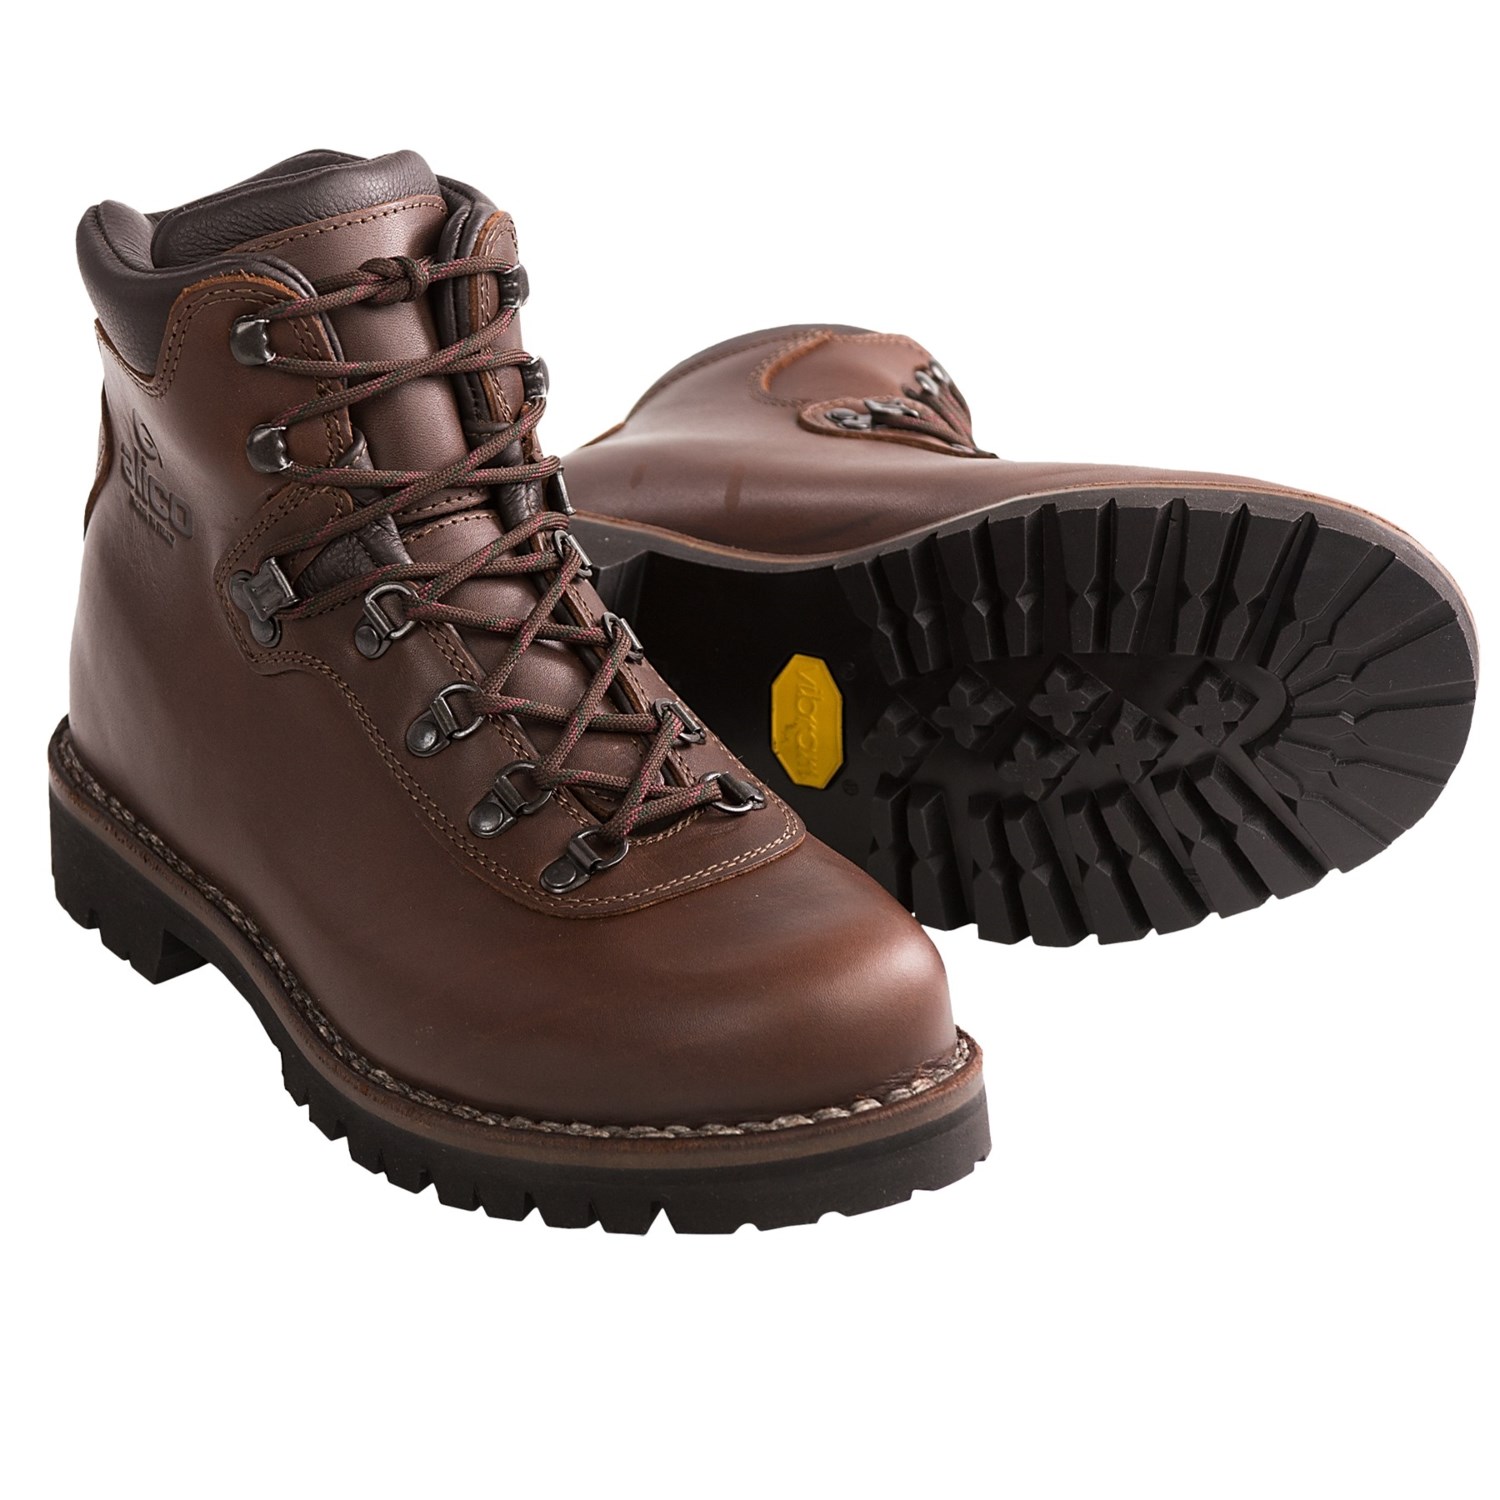 Alico Summit Hiking Boots (For Men) - Save 47%